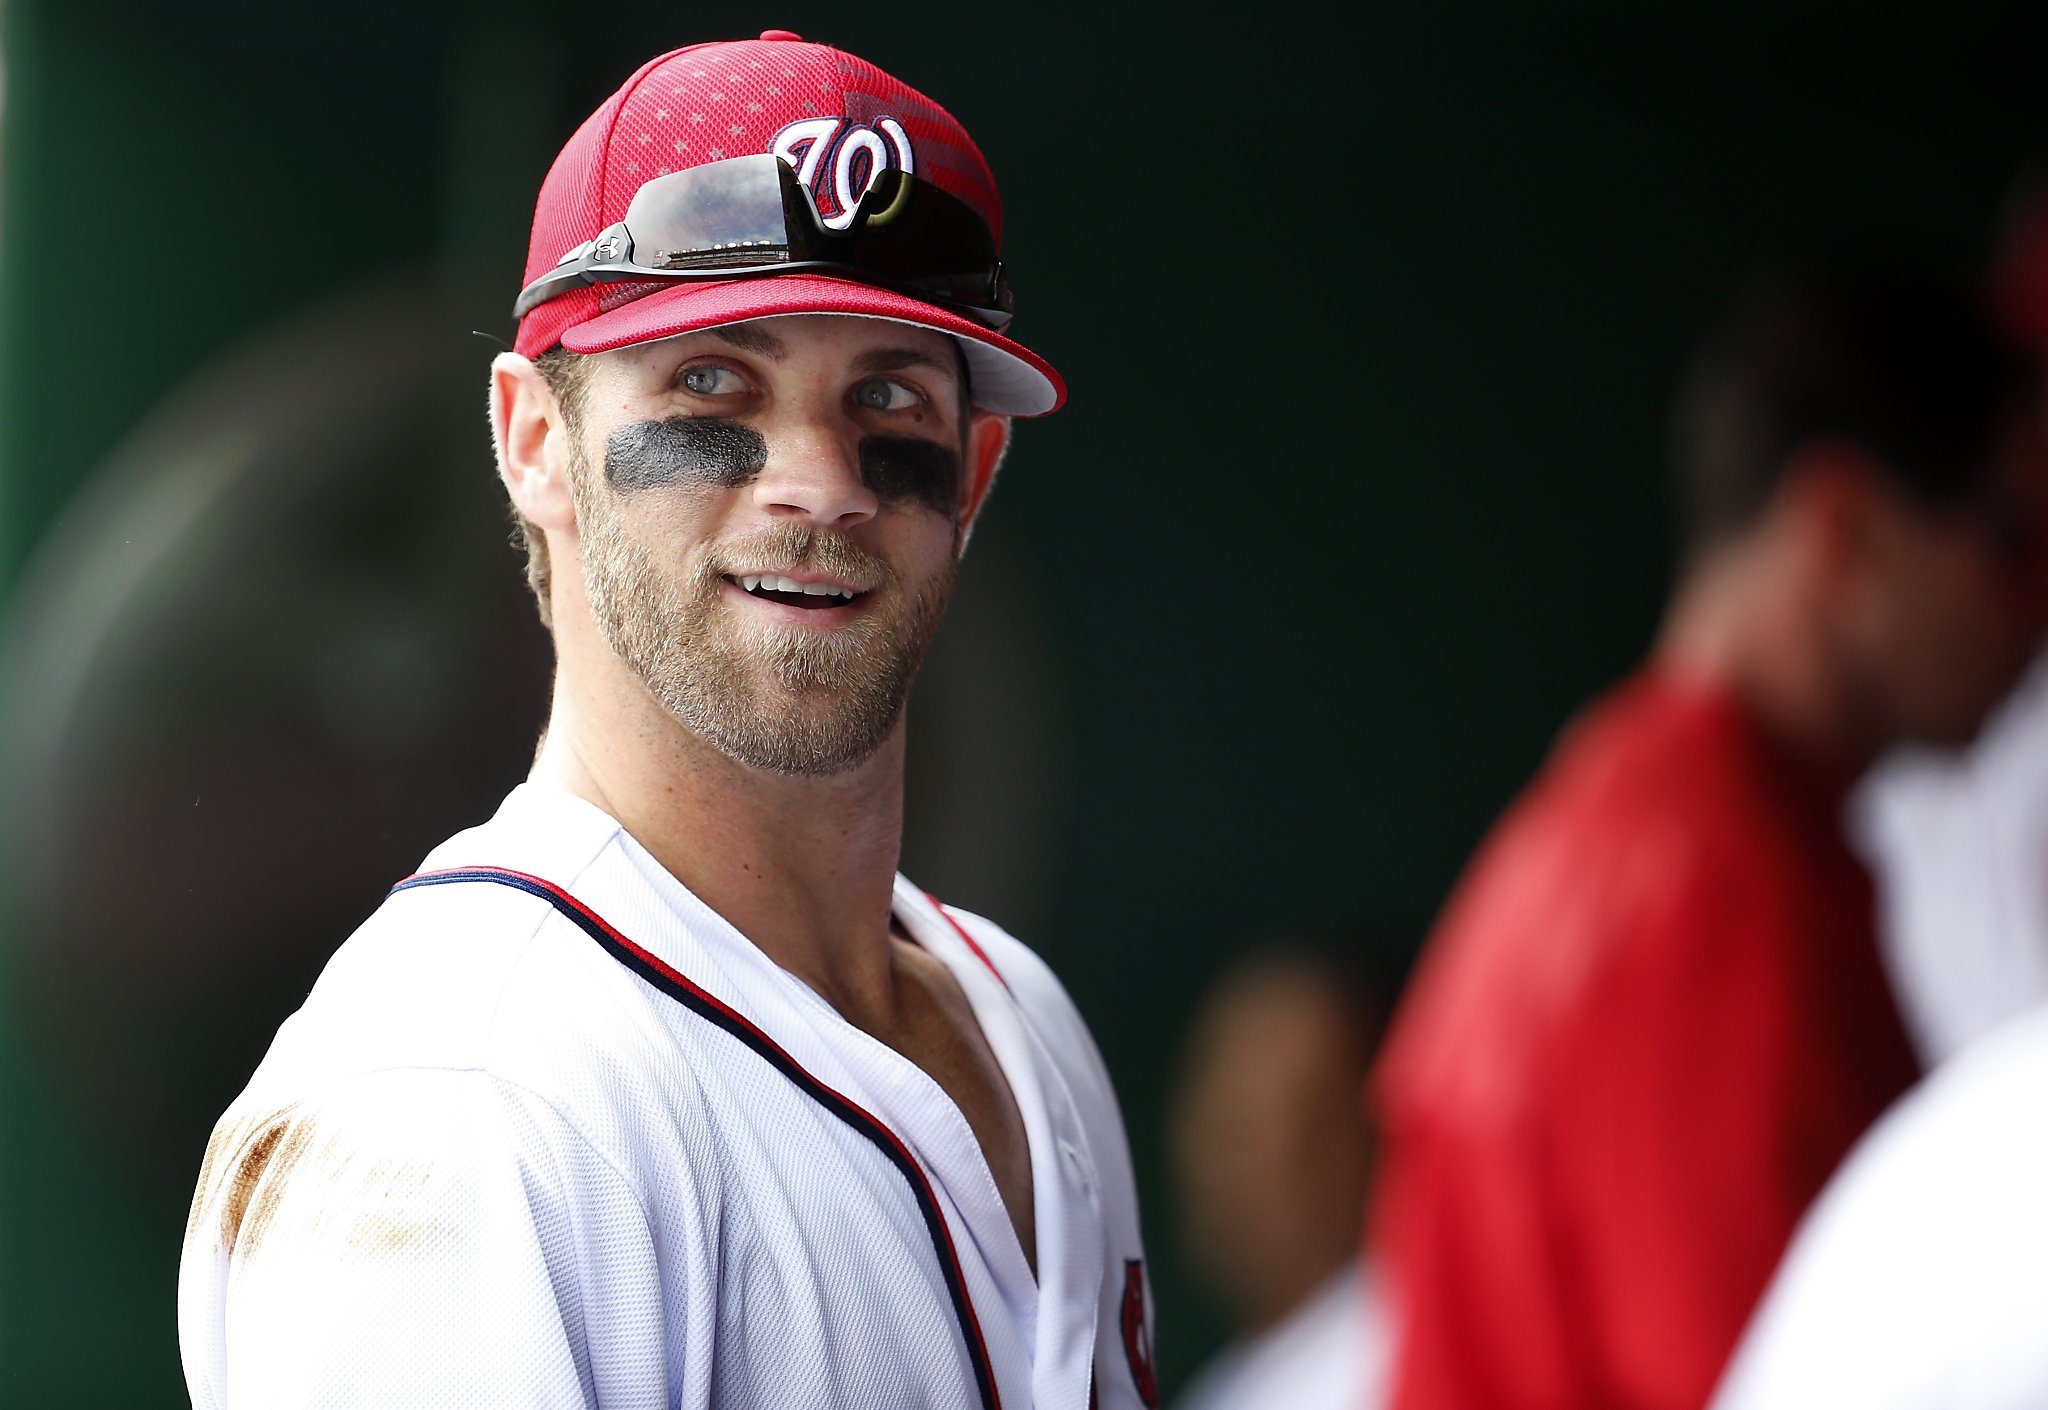 On Dusty Baker, Bryce Harper and Barry Bonds.